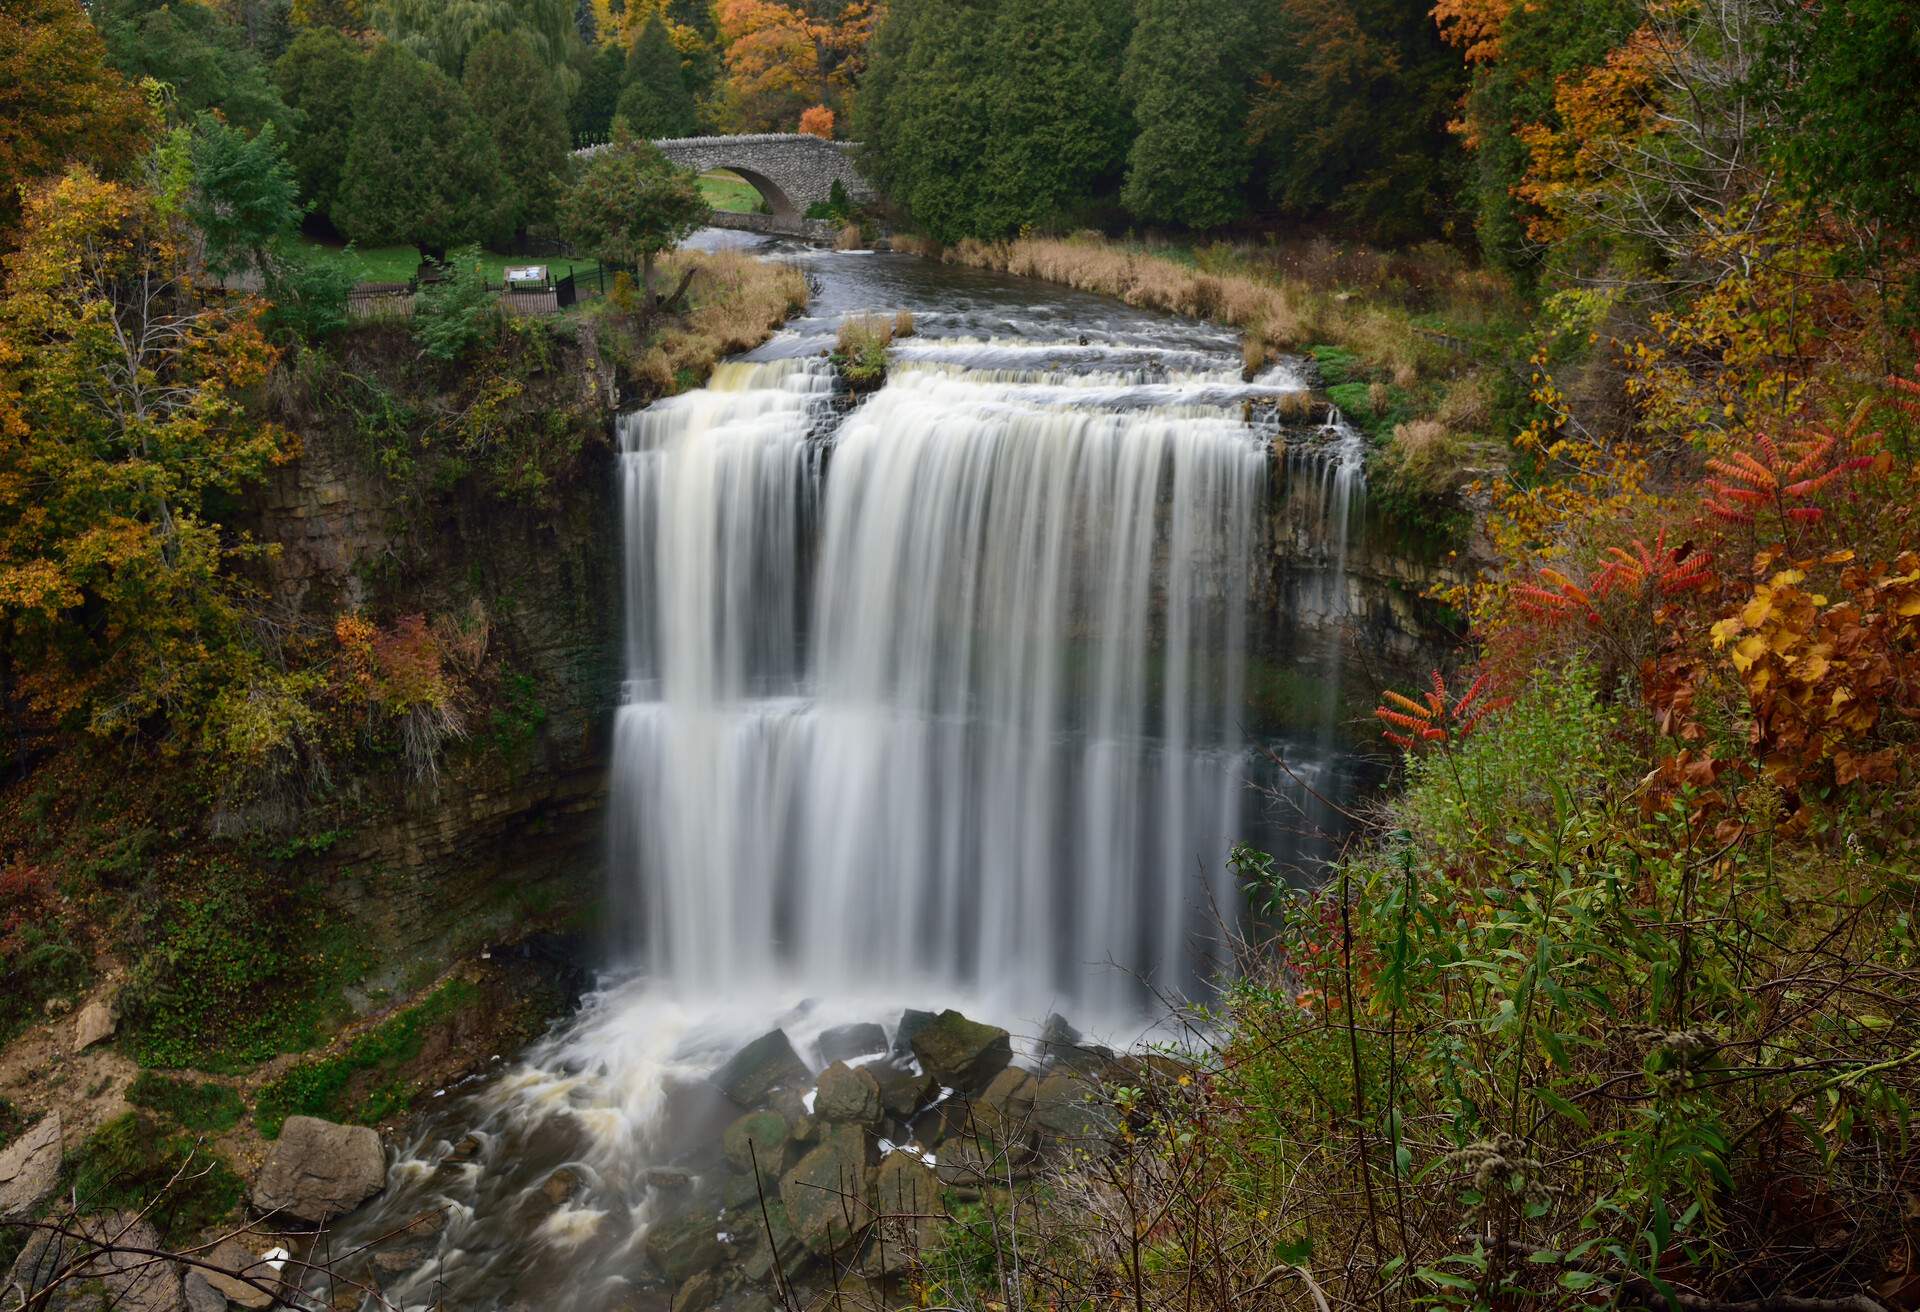 Webster's waterfall is a 22 meter high waterfall in Hamilton Ontario Canada.